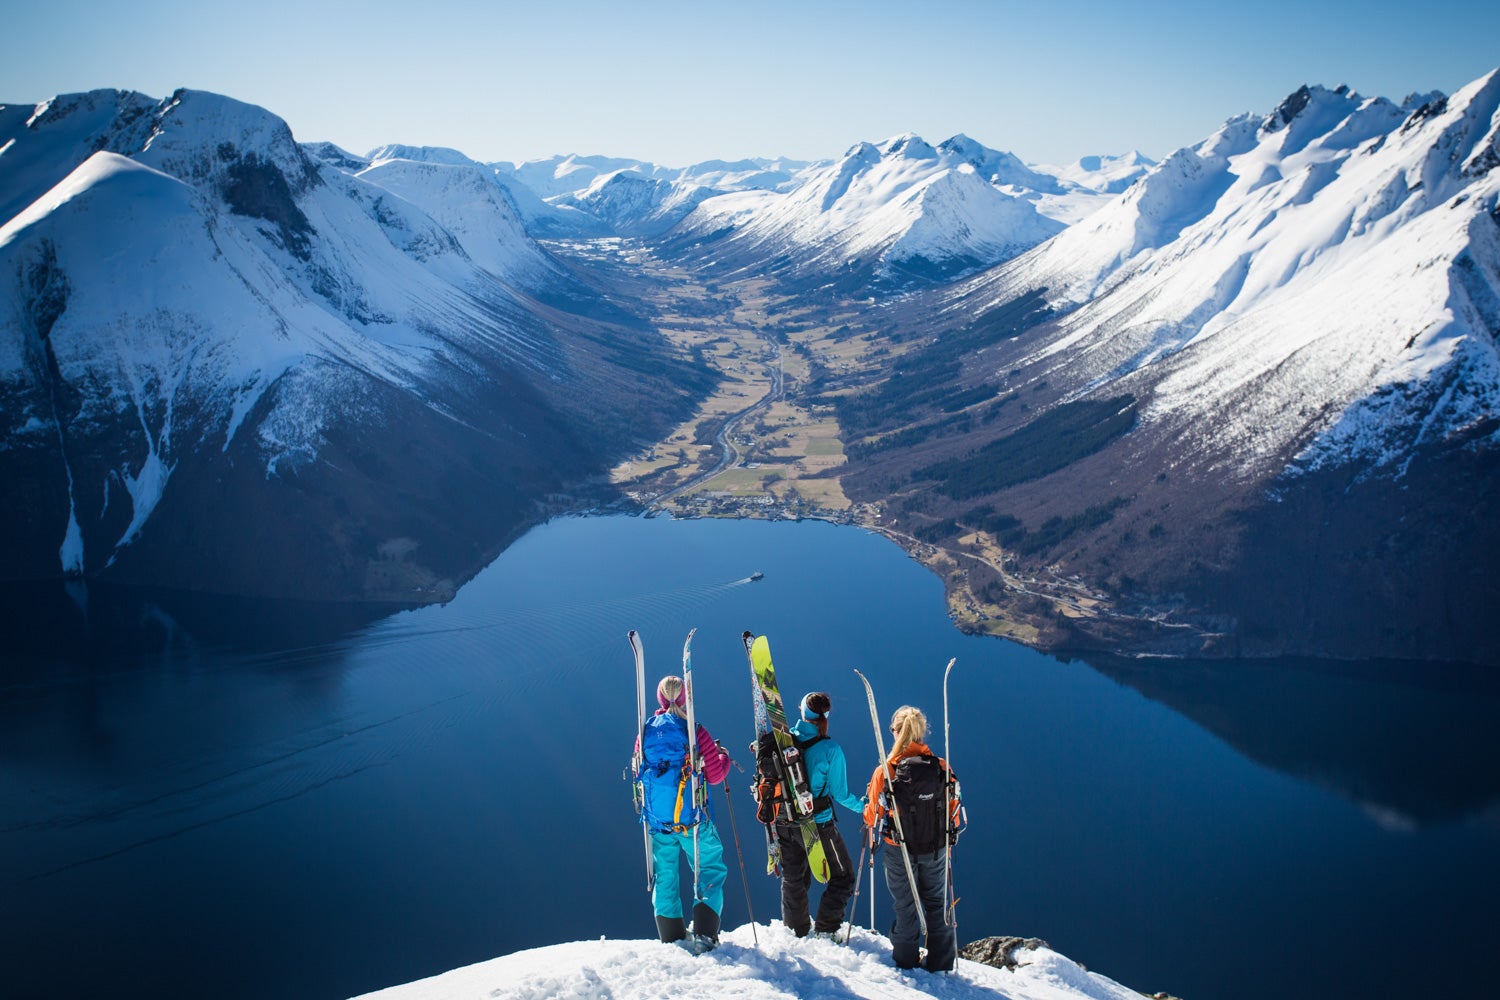 Fjord skiing in the Sunnmore Alps, Norway